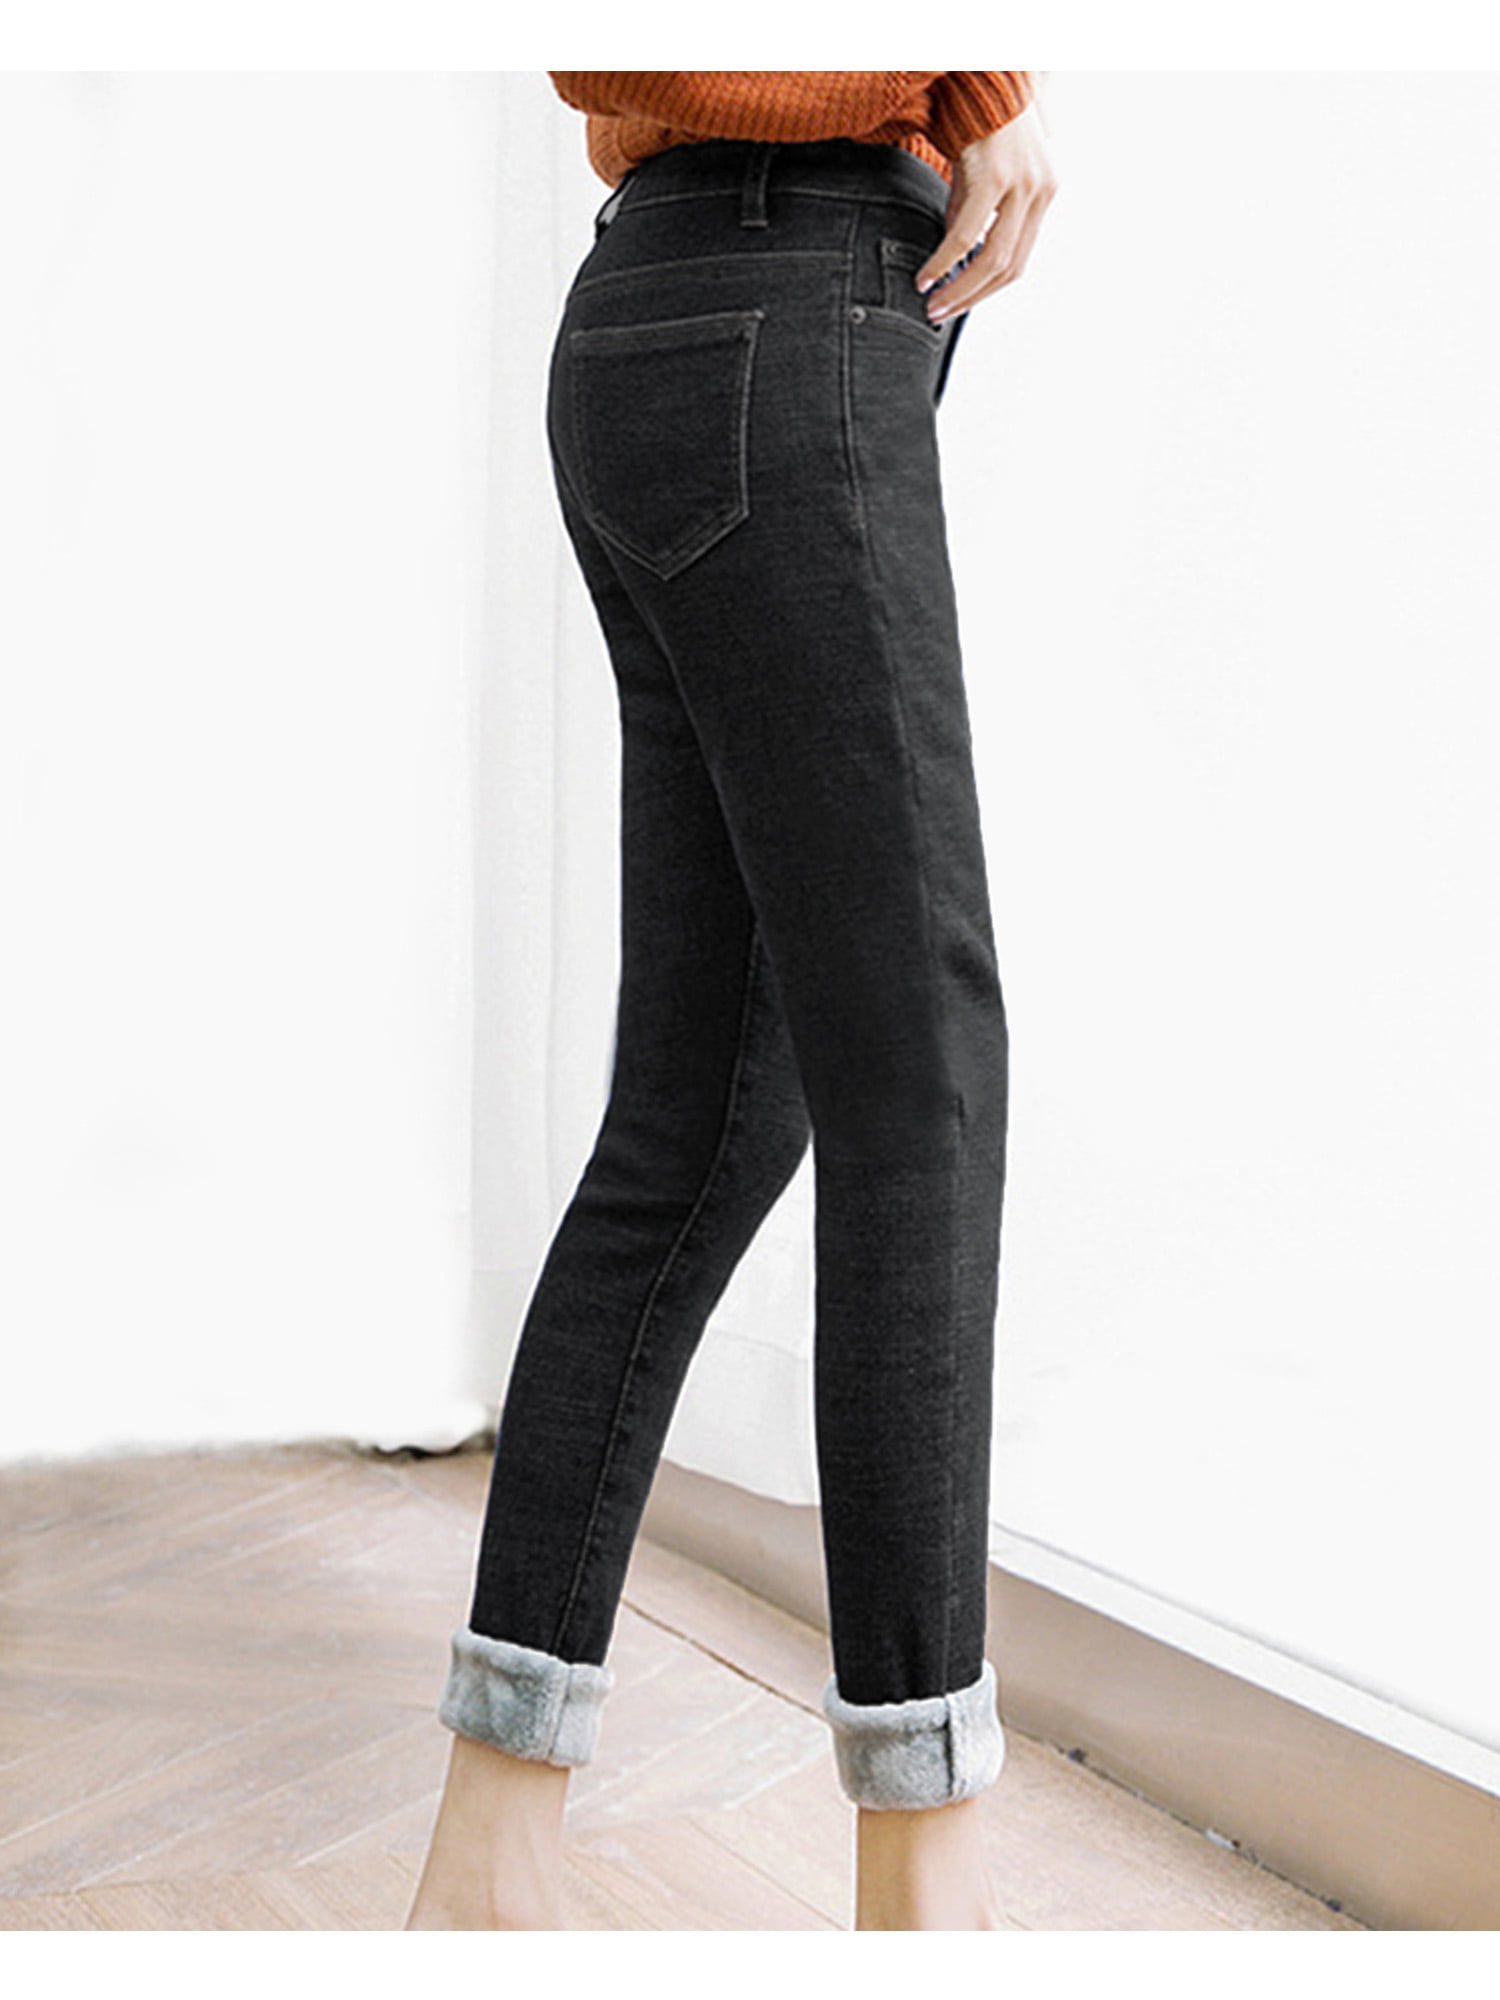 Women Winter Jeans Thick Pants Fleece Lined Plush Straight Stretch Warm  Jeggings